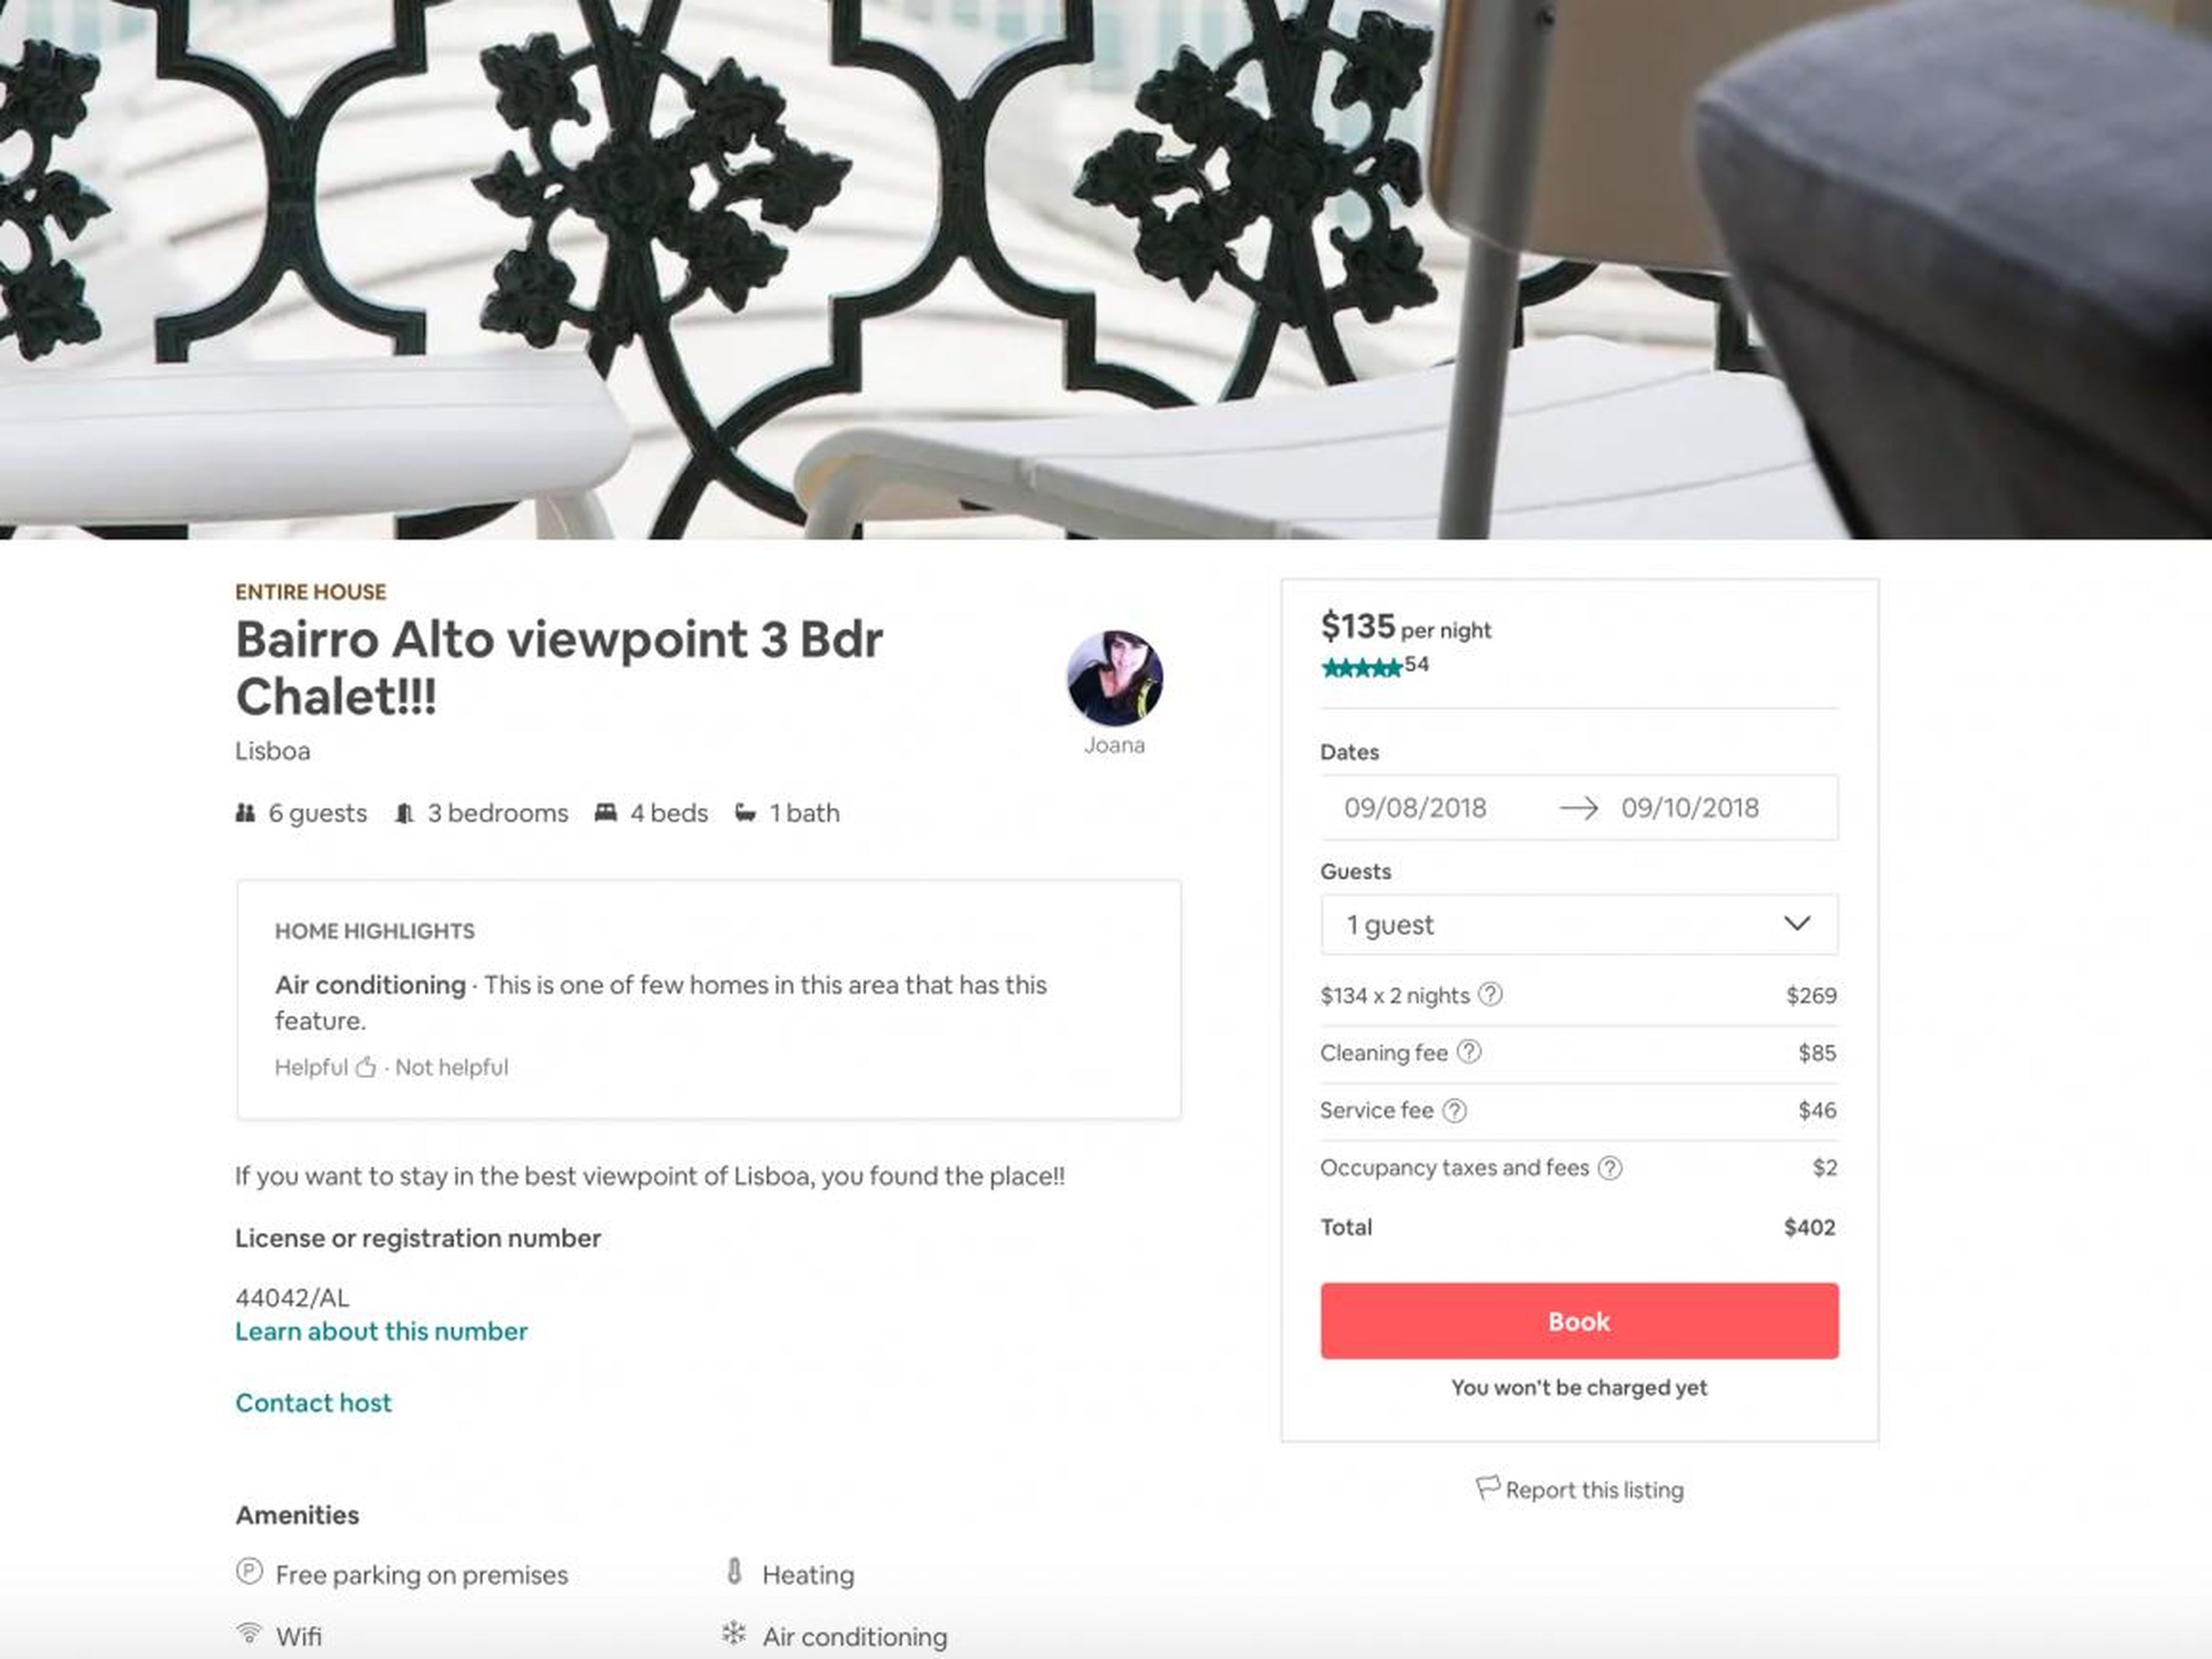 Airbnb is in a war with Booking.com, and taking advantage of that fact can save you a ton of money